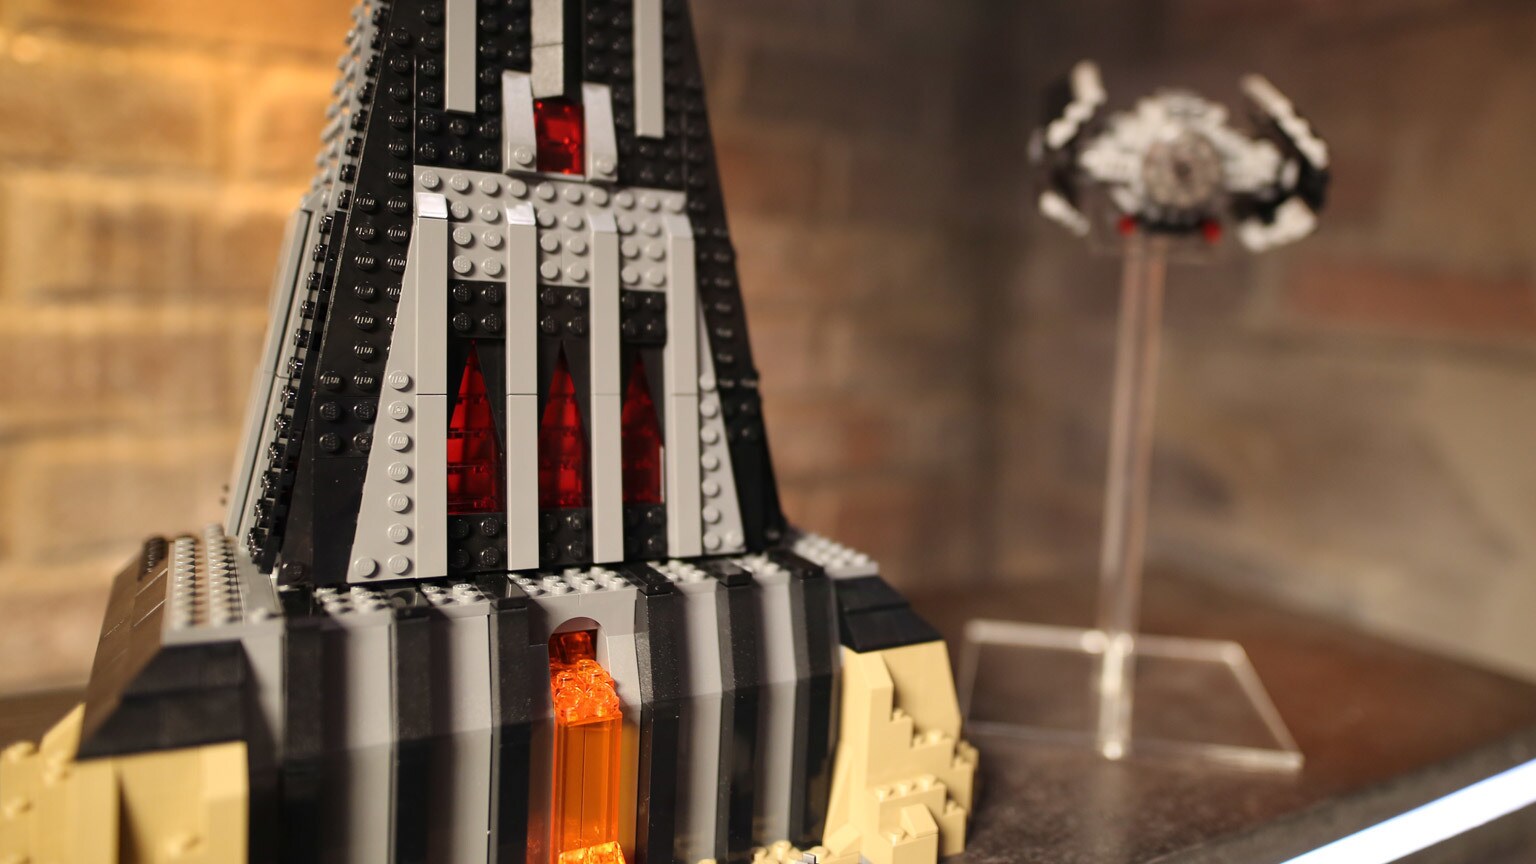 LEGO Star Wars gift box contents revealed